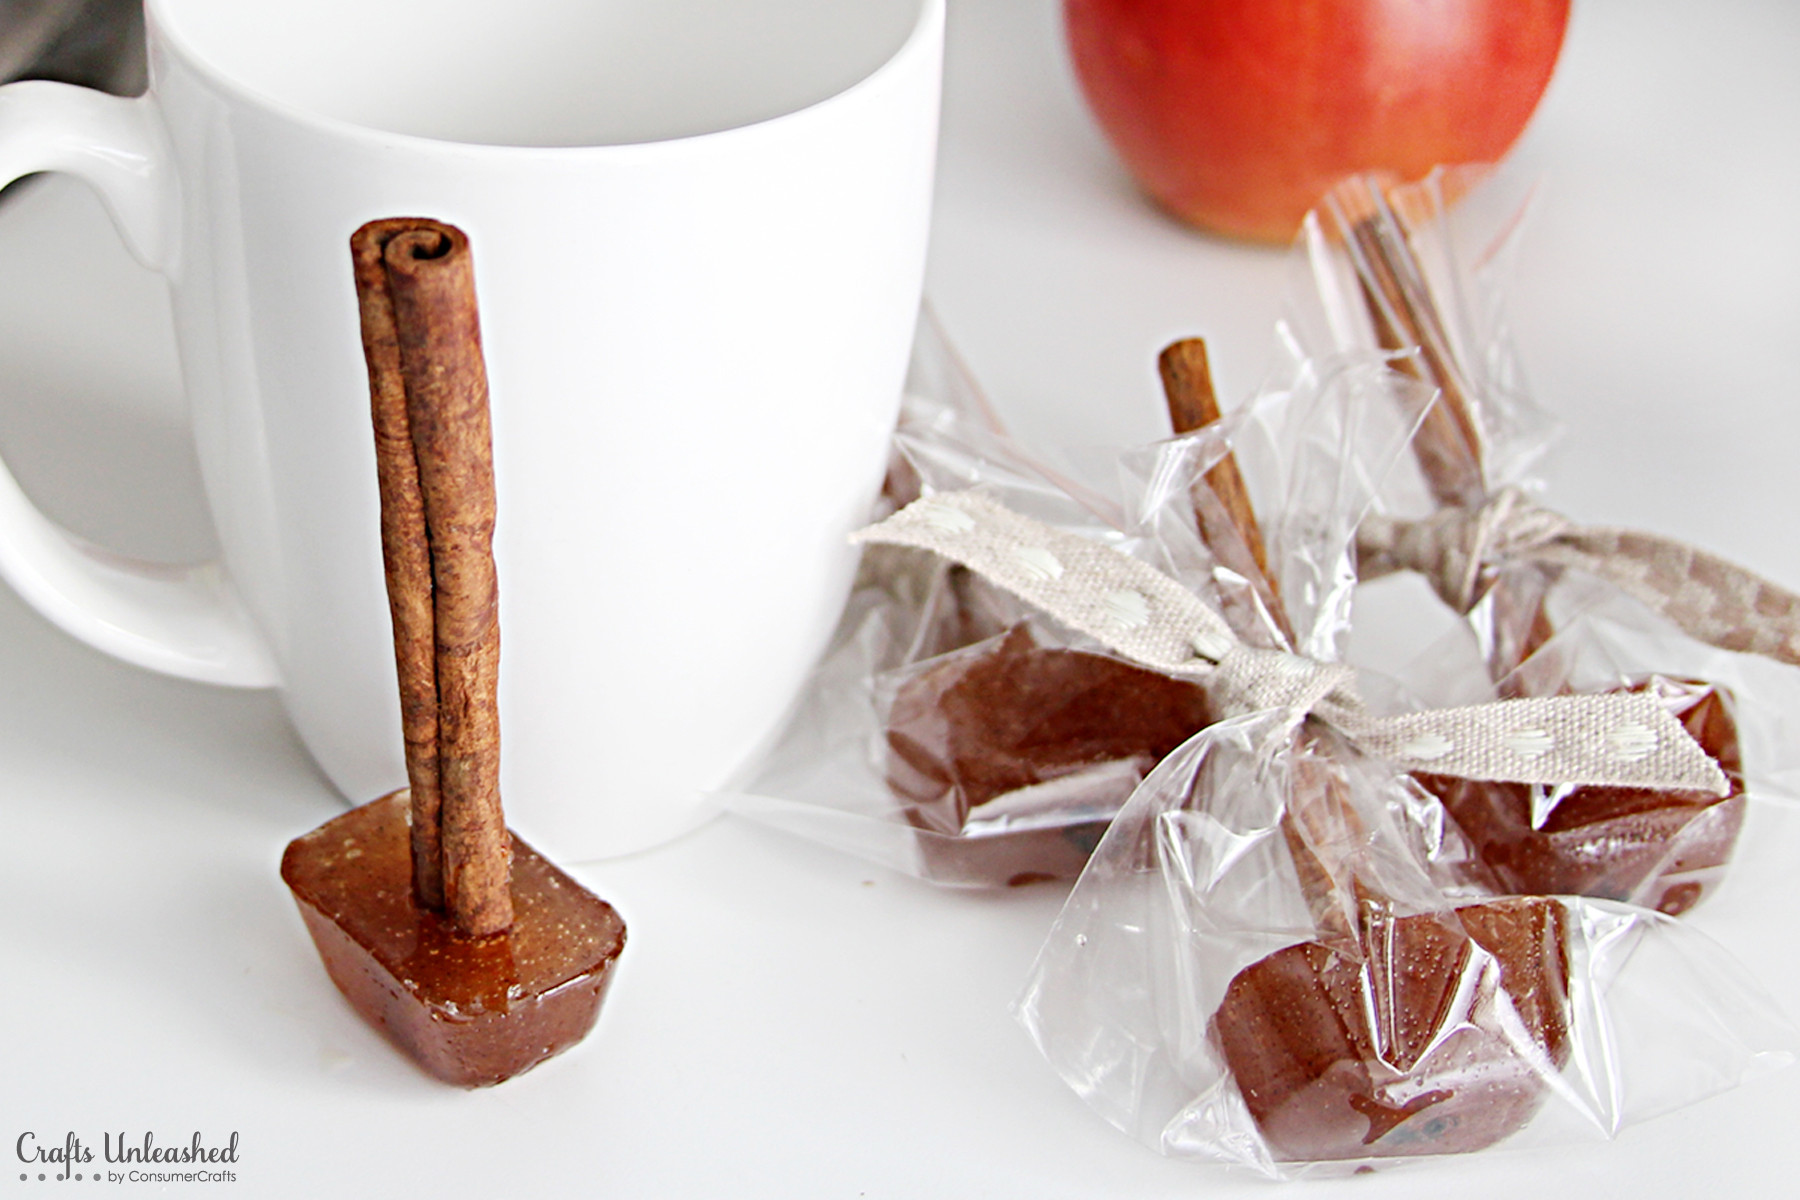 Home Made Crafts
 Homemade Apple Cider Gifts With Spicy Cinnamon Mulling Sticks